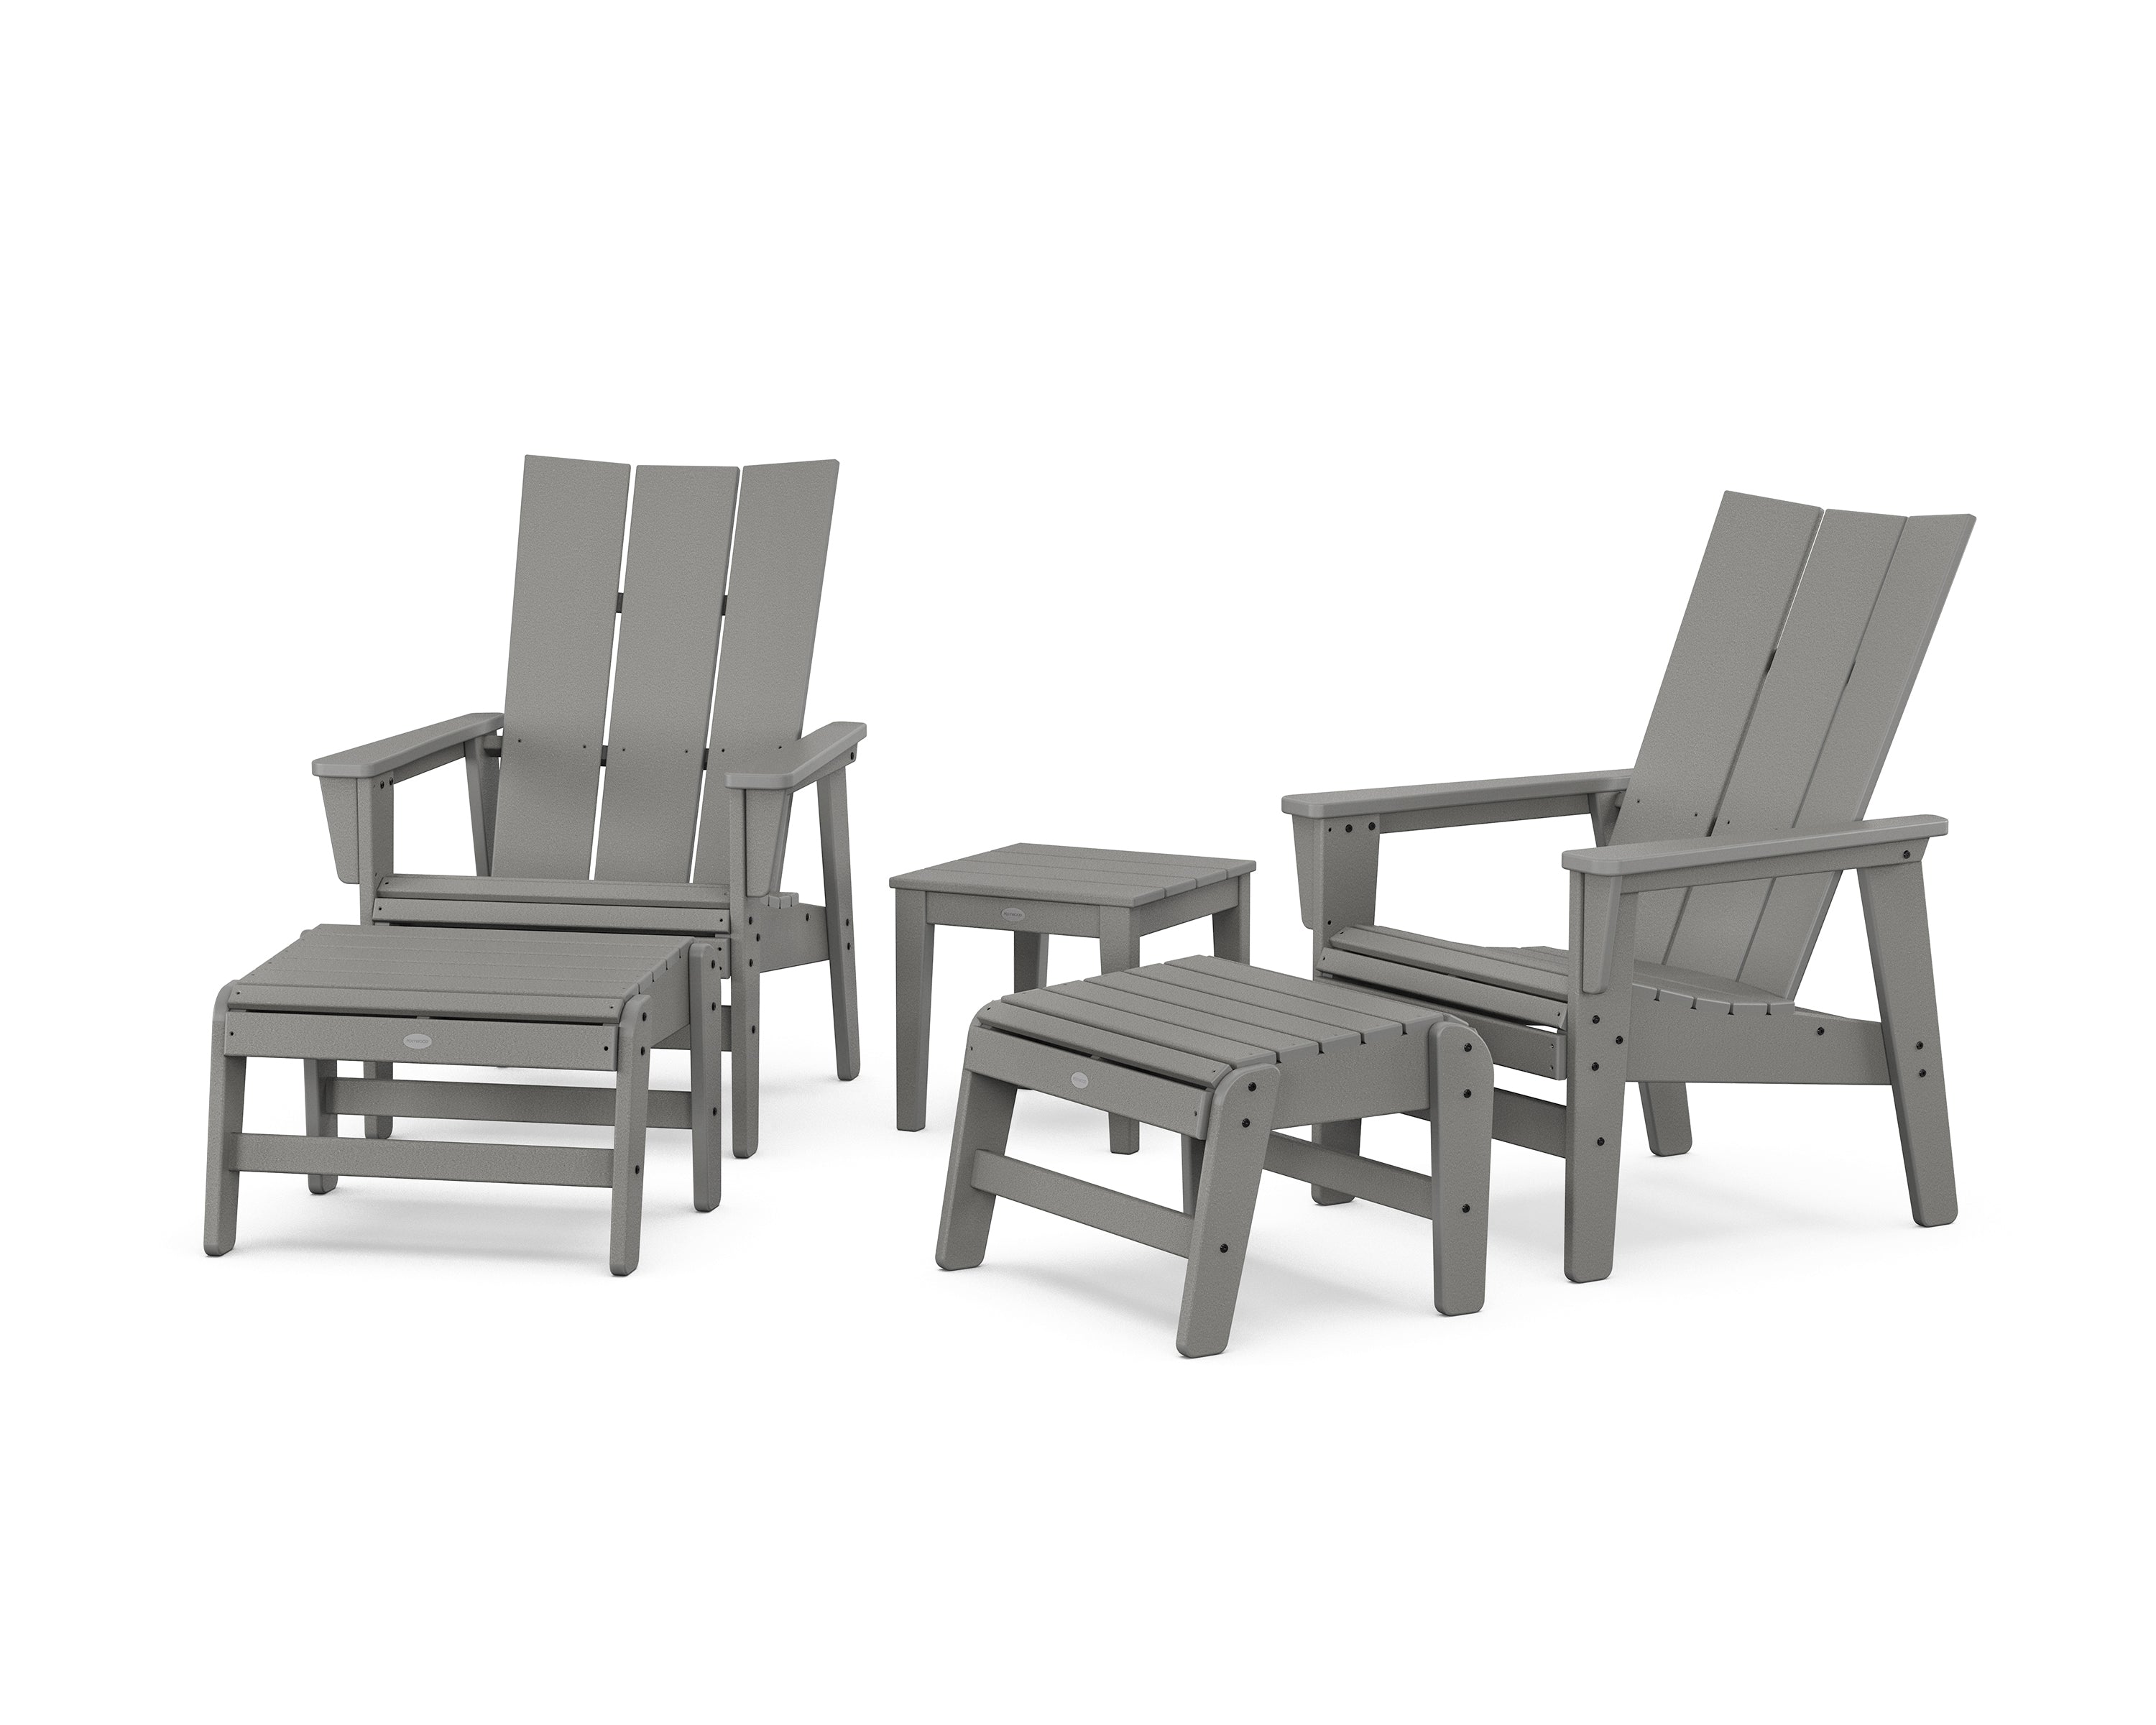 POLYWOOD® 5-Piece Modern Grand Upright Adirondack Set with Ottomans and Side Table in Slate Grey